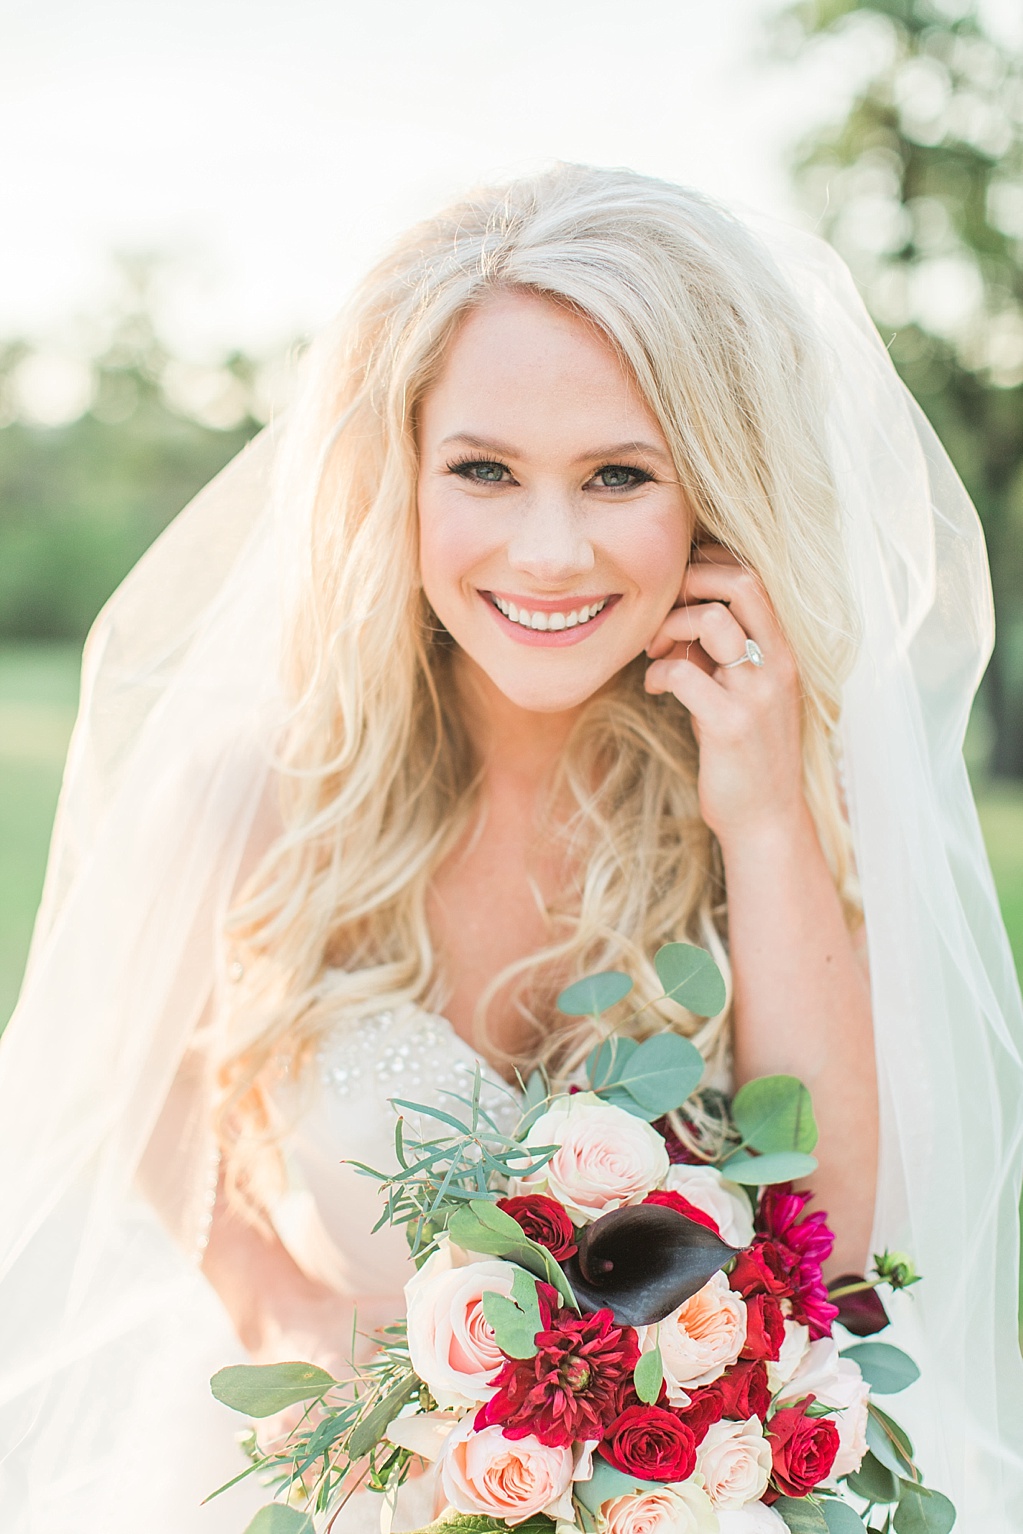 A Classic Bridal Session at Turtle Creek Olive Grove Wedding Venue in Kerrville, Texas 0015